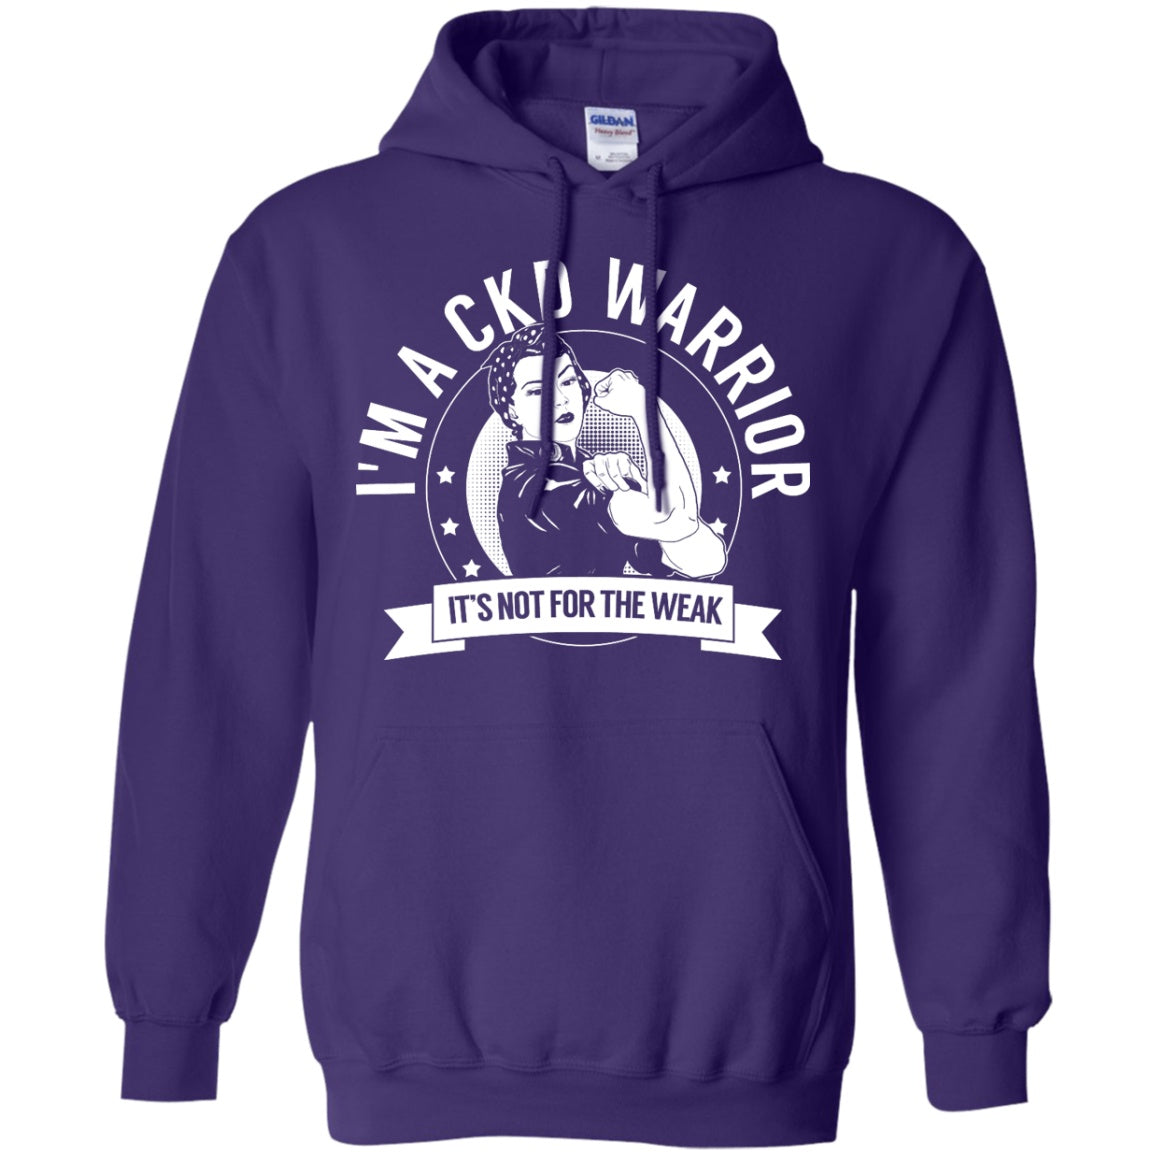 Chronic Kidney Disease - CKD Warrior Not For The Weak Pullover Hoodie 8 oz - The Unchargeables